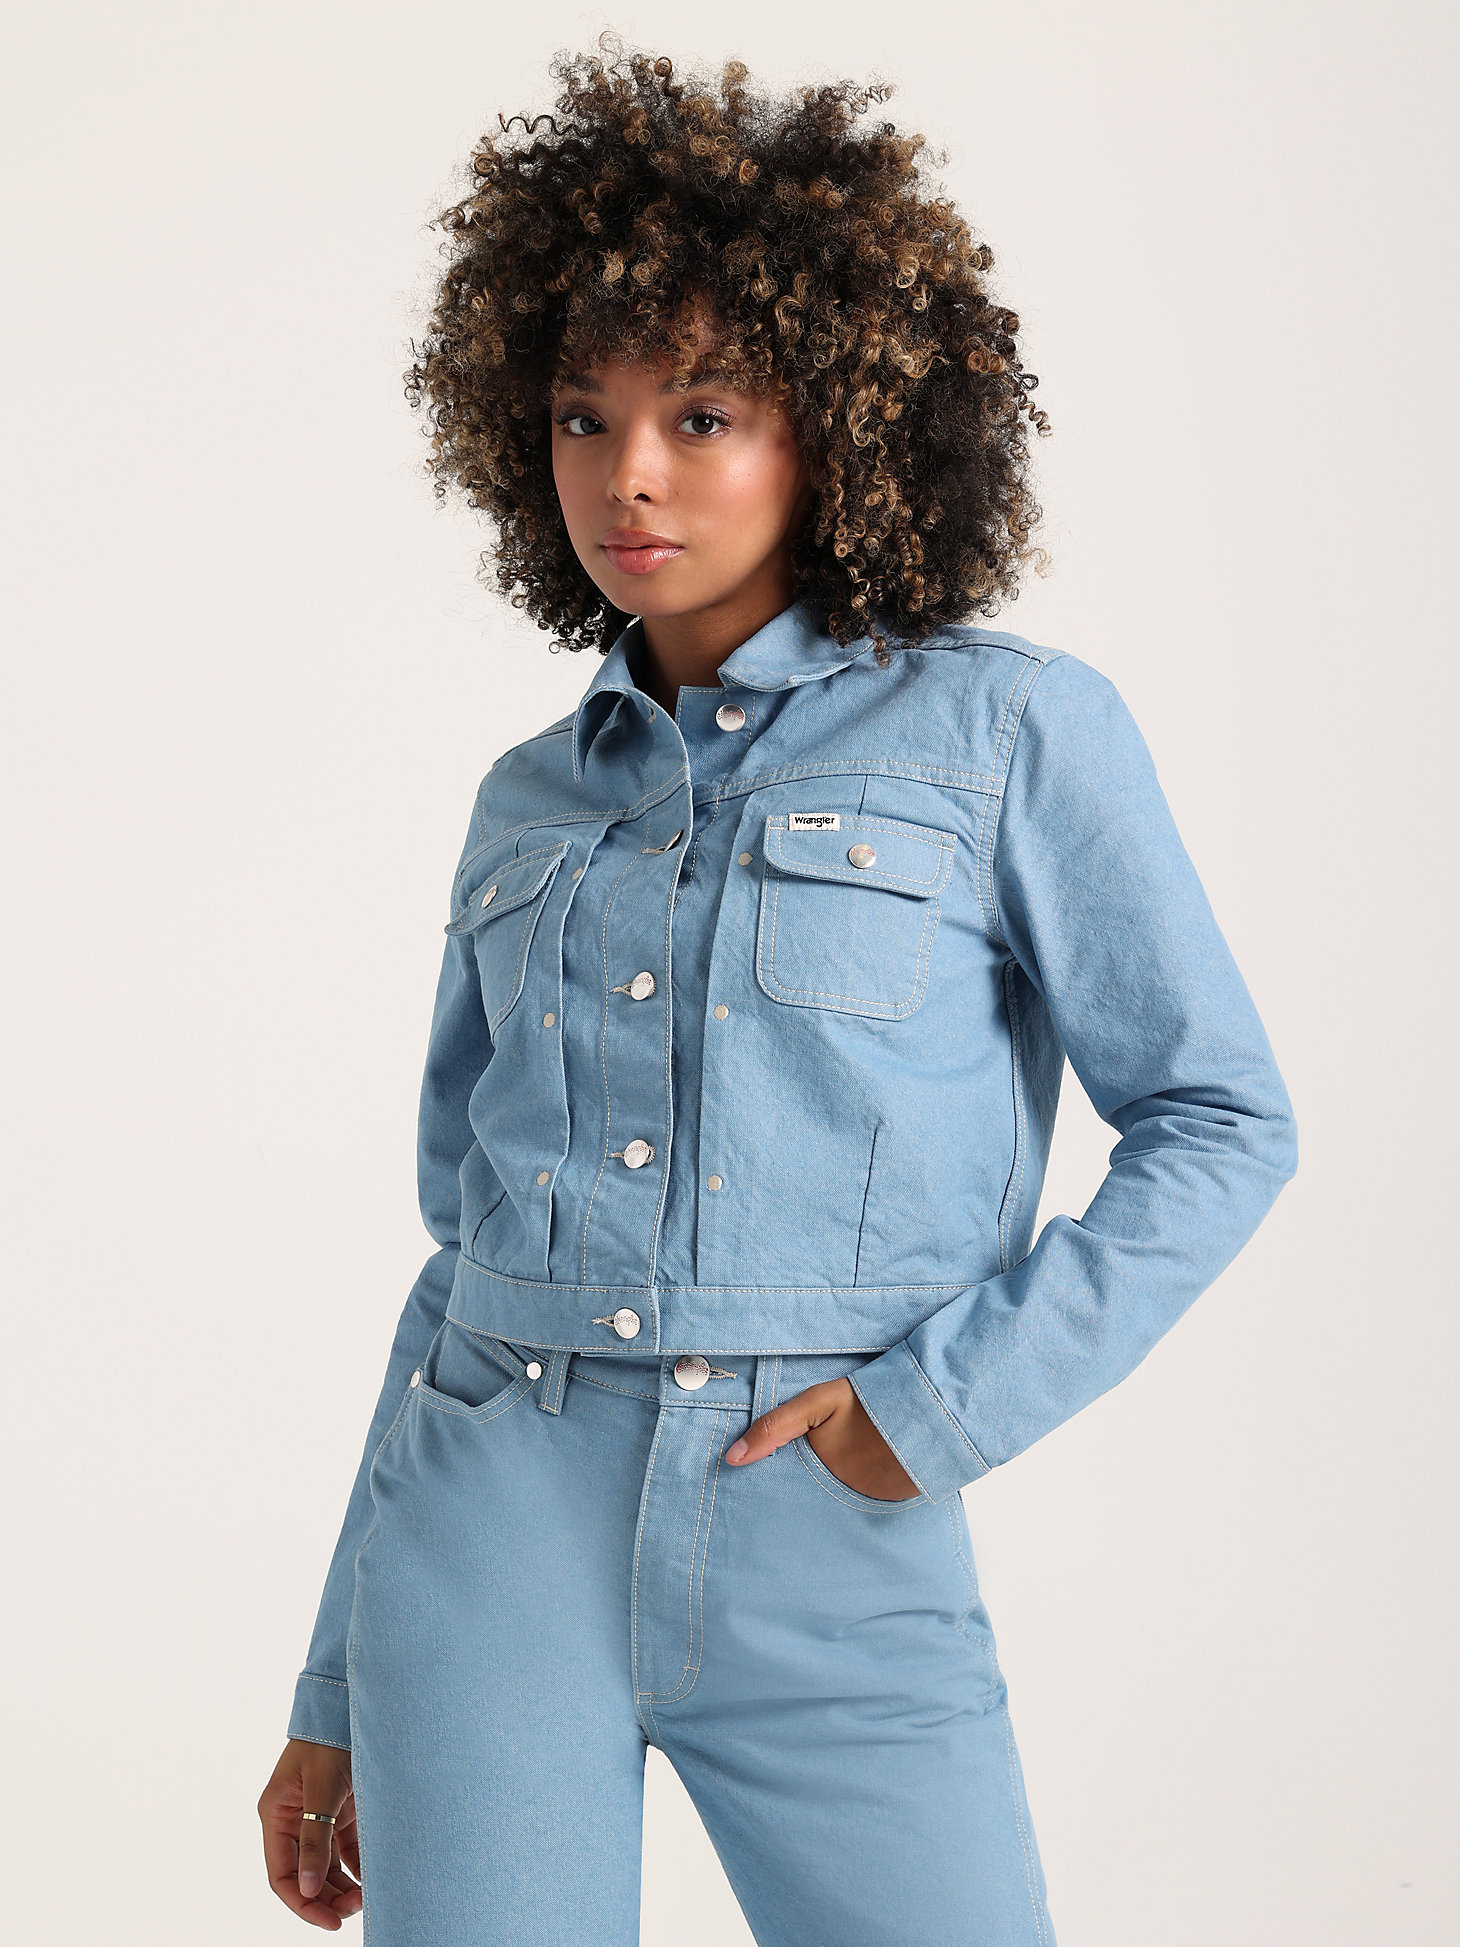 Blue Bell Jacket in Wrangler Blue main view